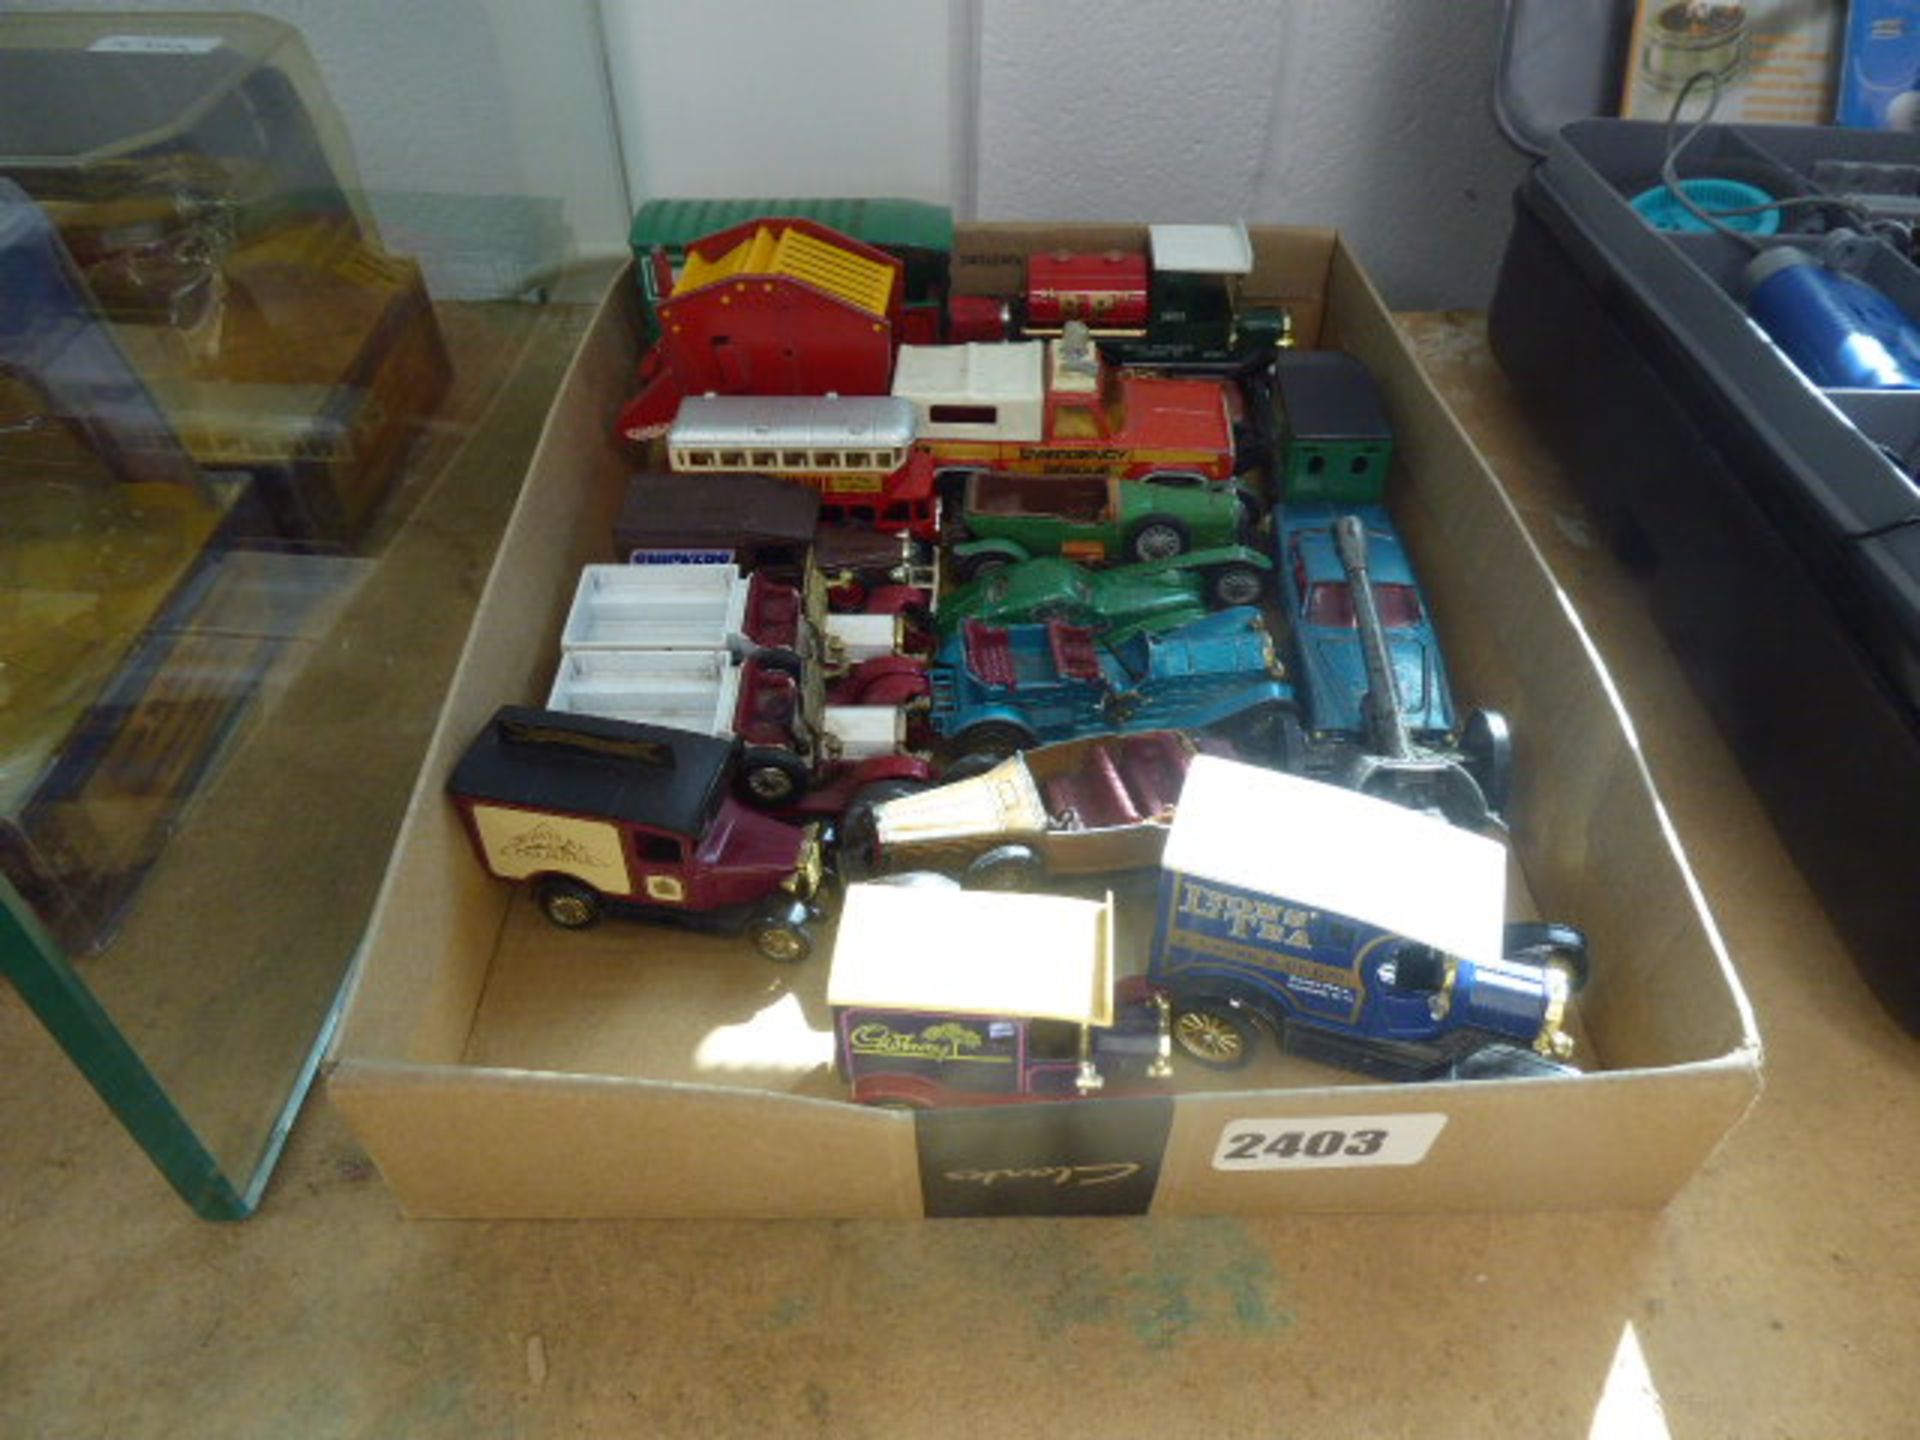 Tray containing play worn die cast vehicles